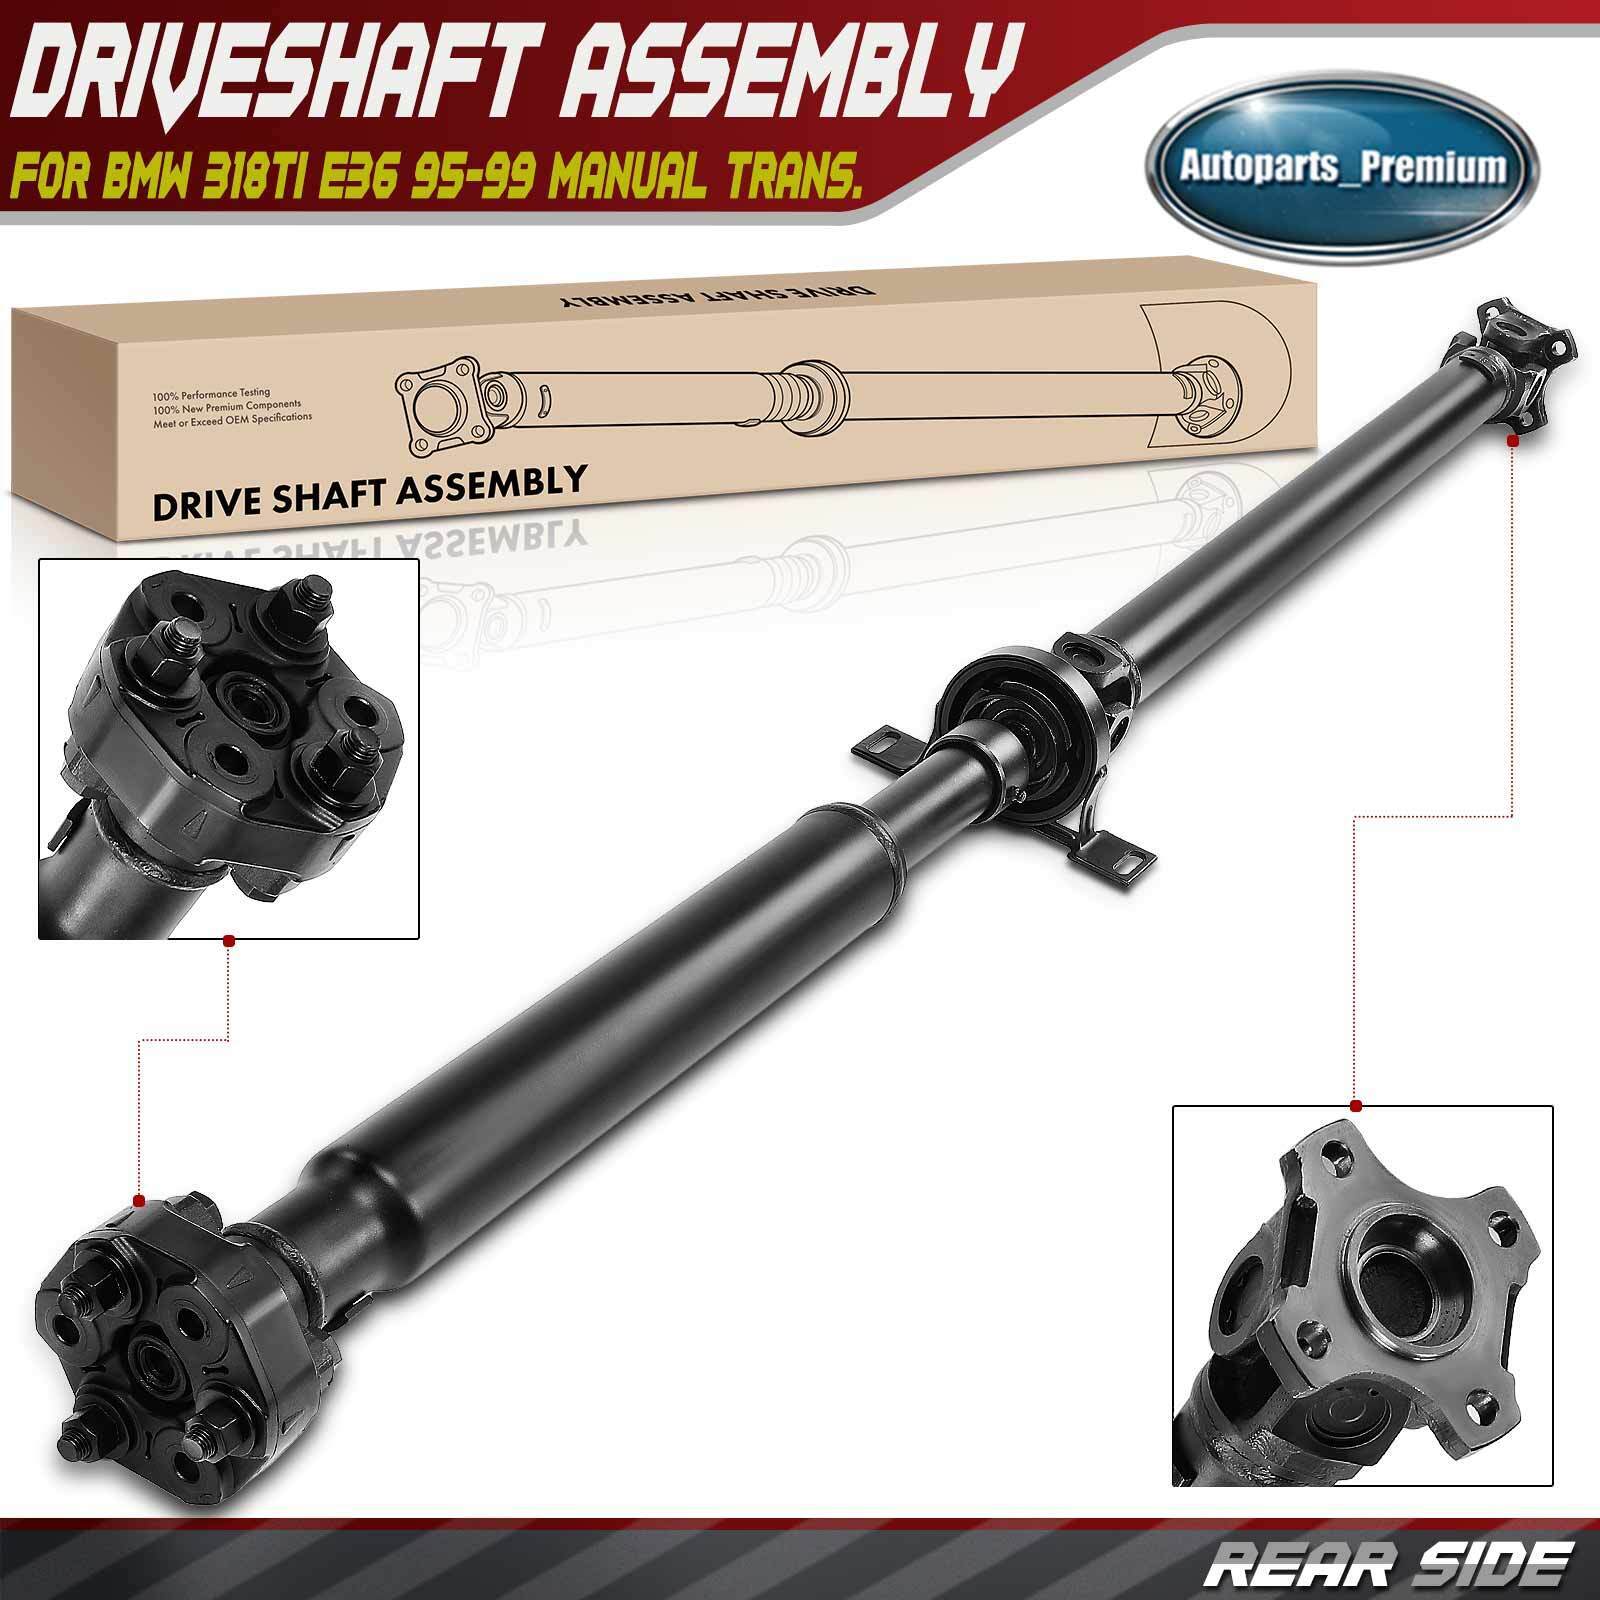 Rear Driveshaft Assembly for BMW 318ti 1995 1996 1997 1998 1999 Manual Trans.